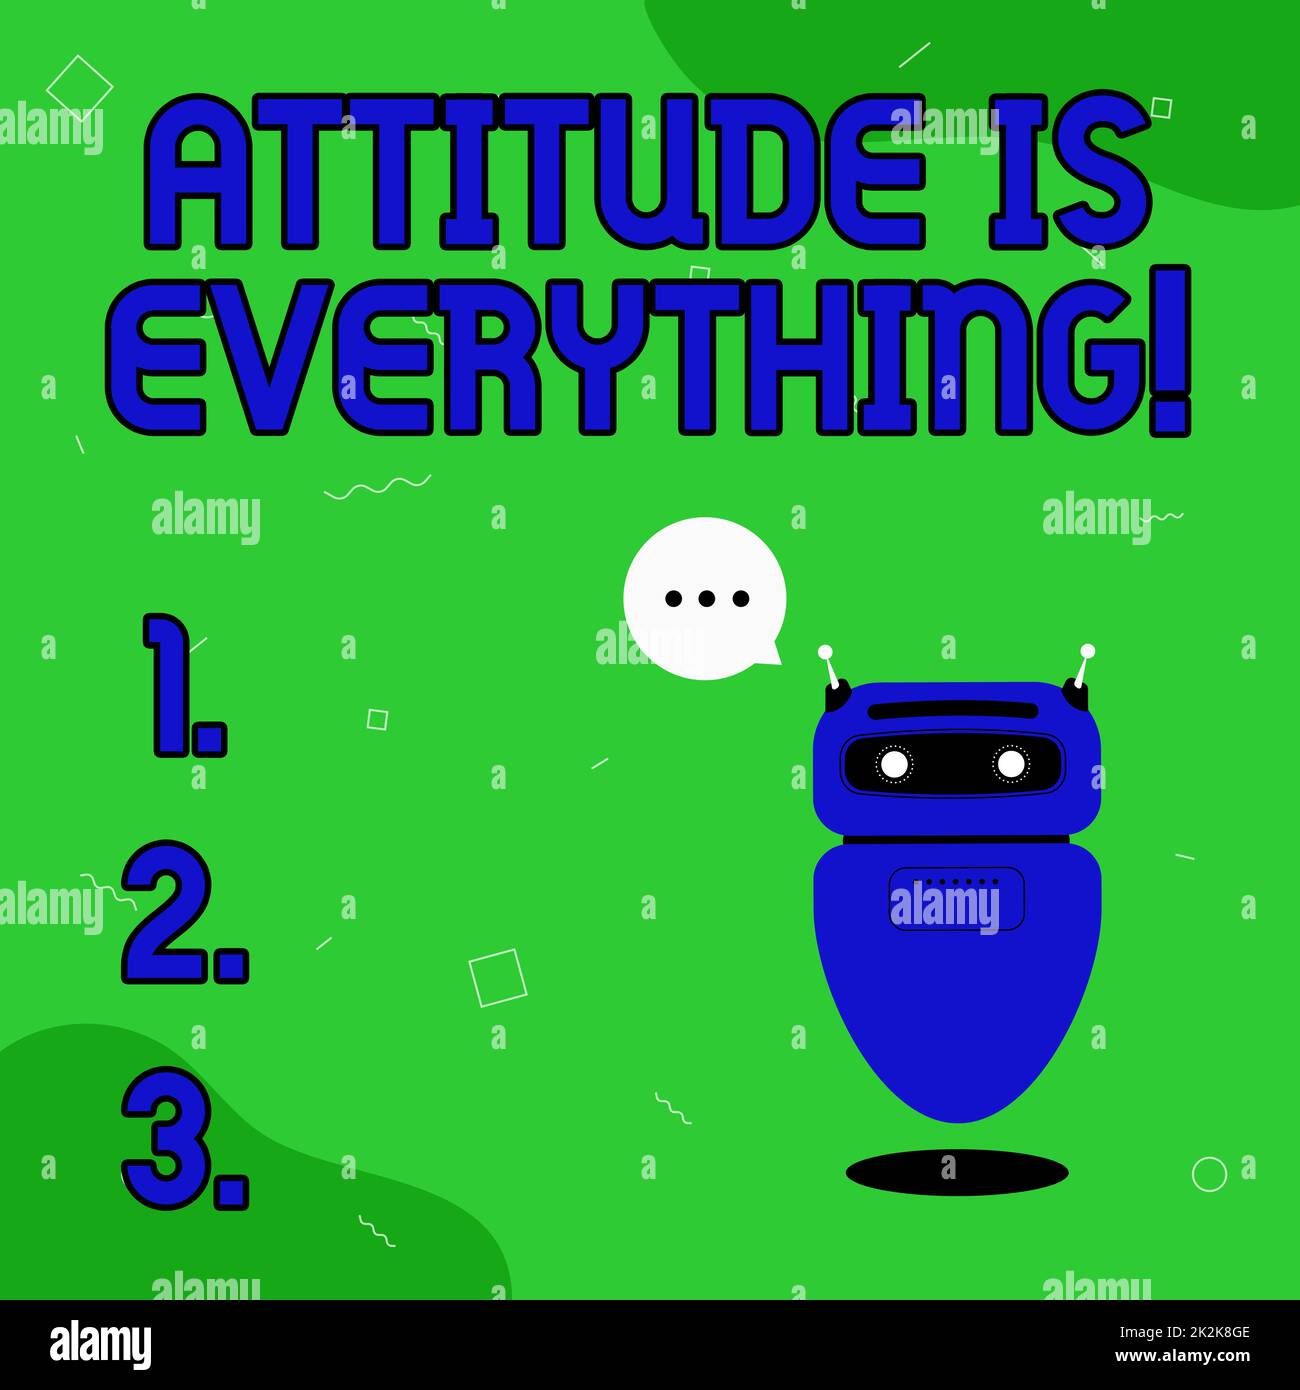 Conceptual caption Attitude Is Everything. Business concept Positive Outlook is the Guide to a Good Life Illustration Of Cute Floating Robot Telling Information In A Chat Cloud. Stock Photo